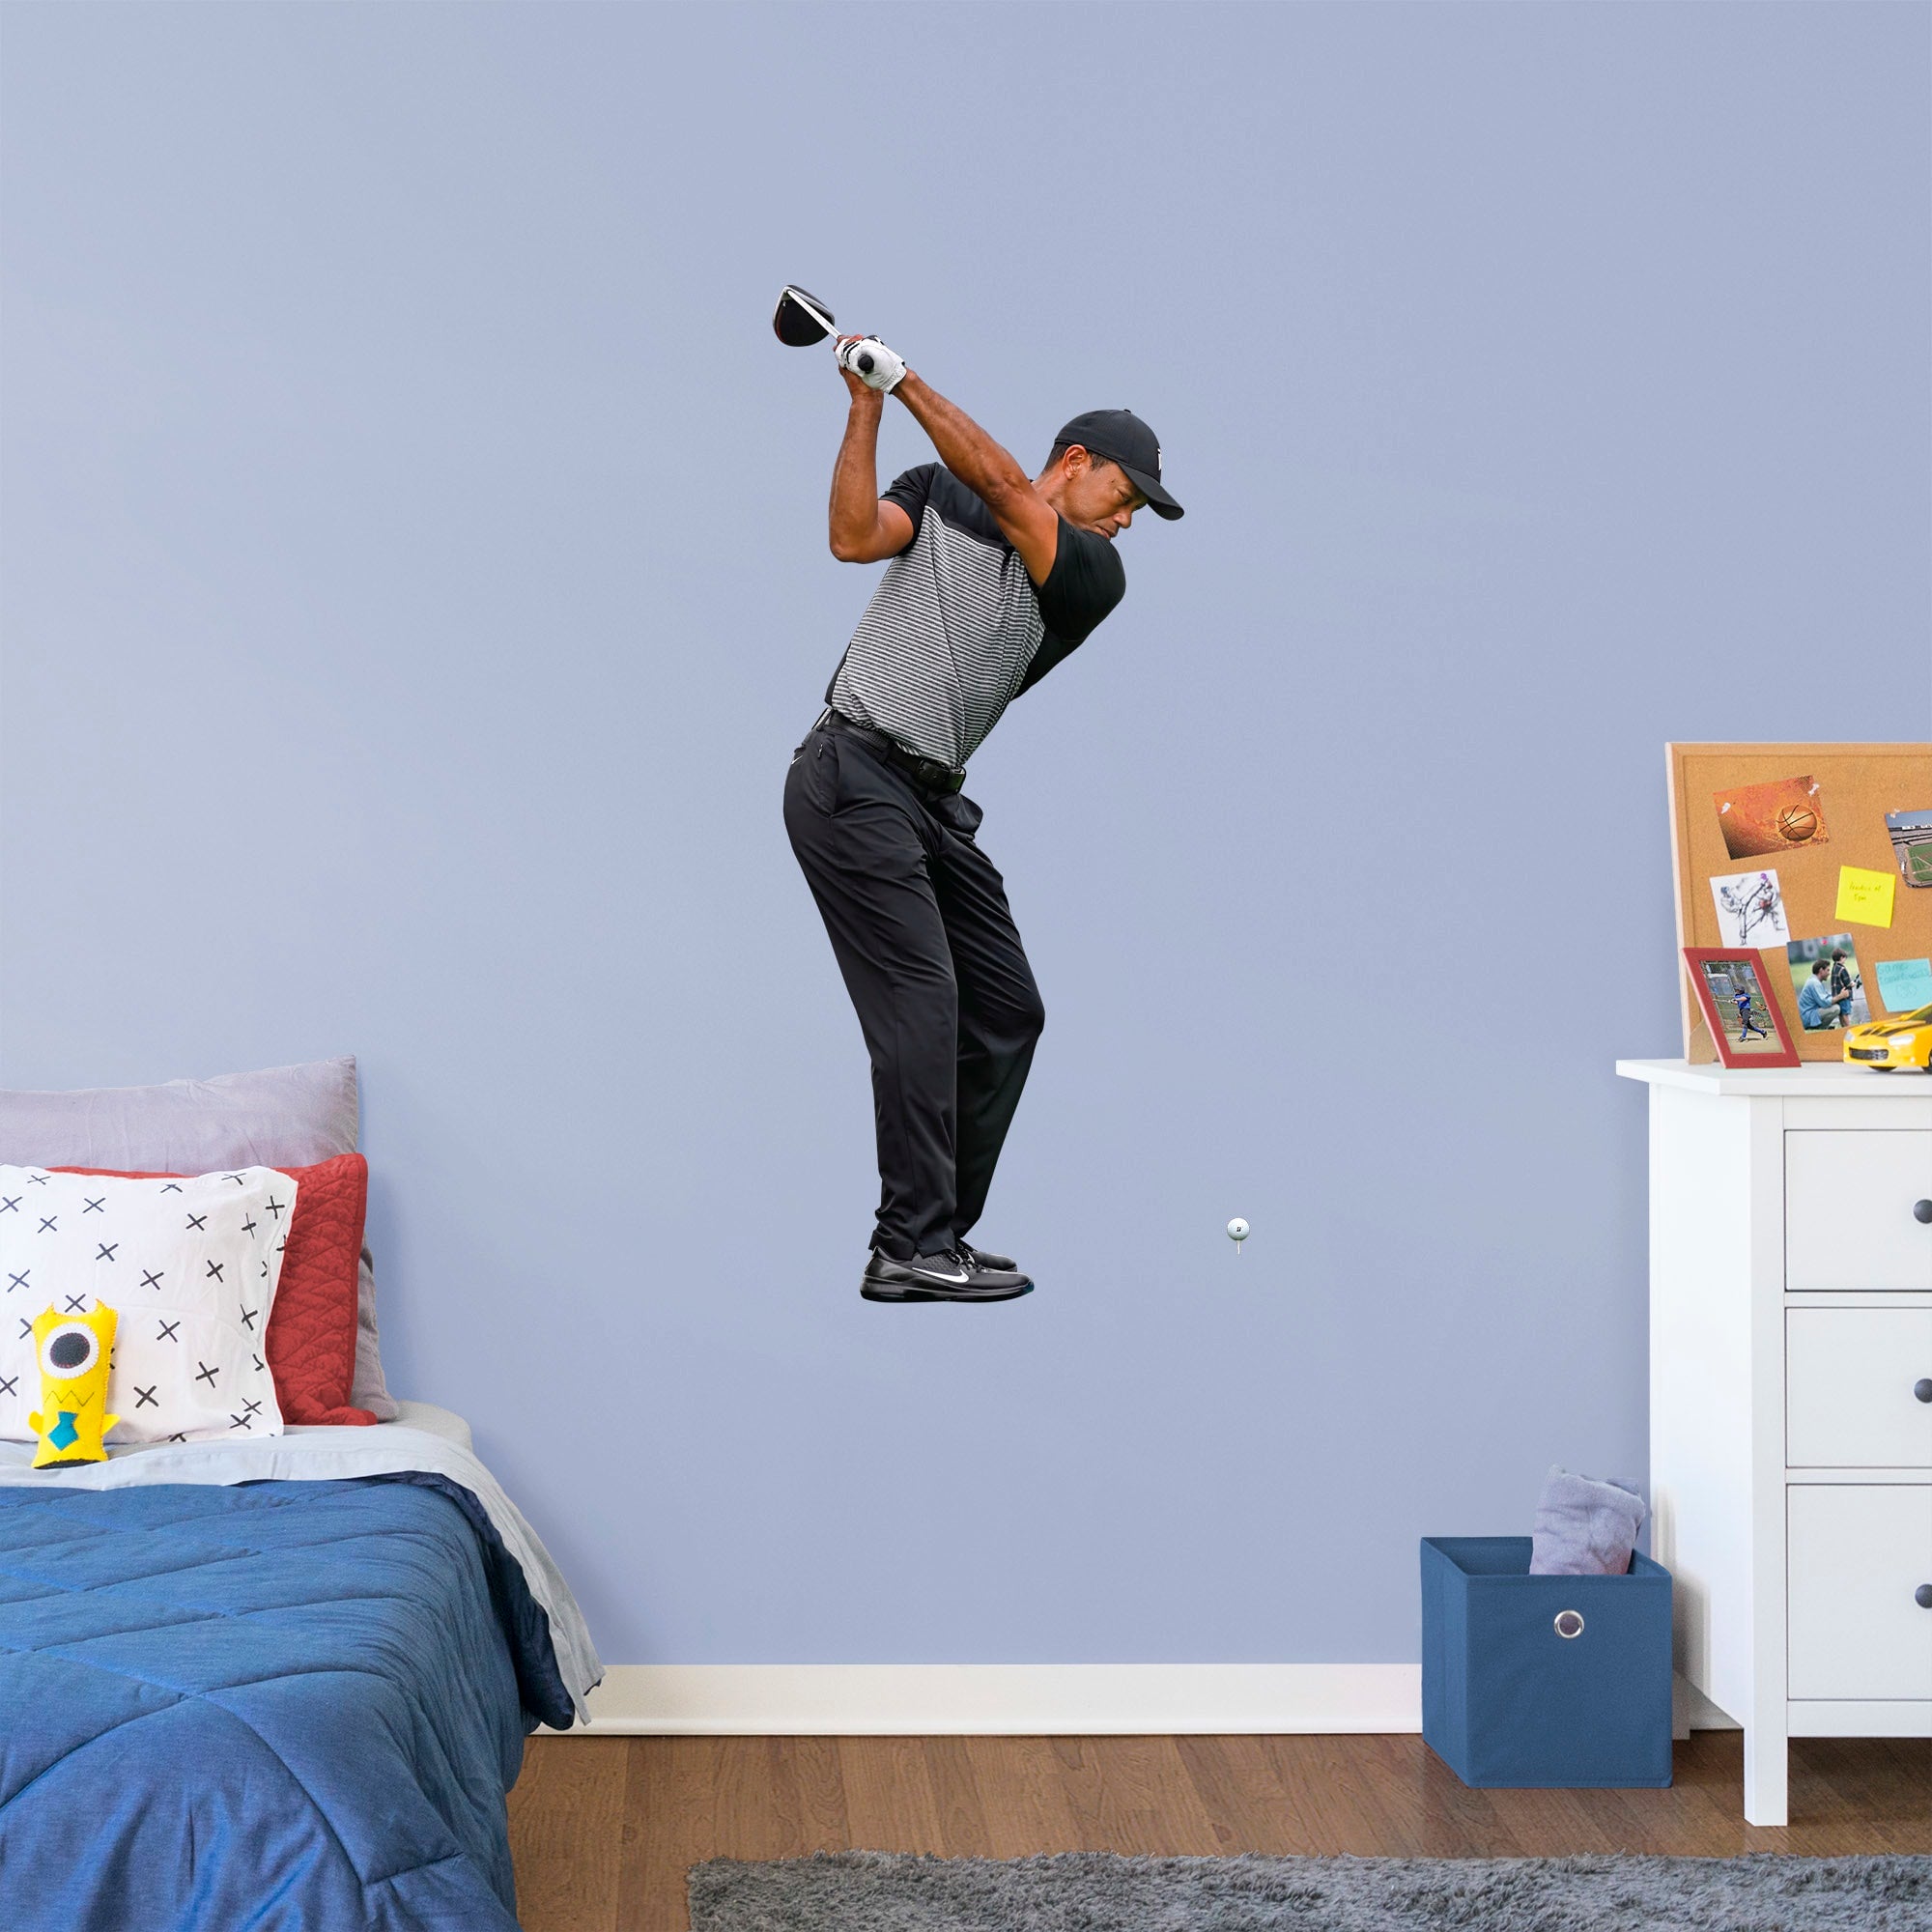 Tiger Woods: Drive - Officially Licensed Removable Wall Decal Giant Athlete + 2 Decals (21"W x 51"H) by Fathead | Wood/Vinyl